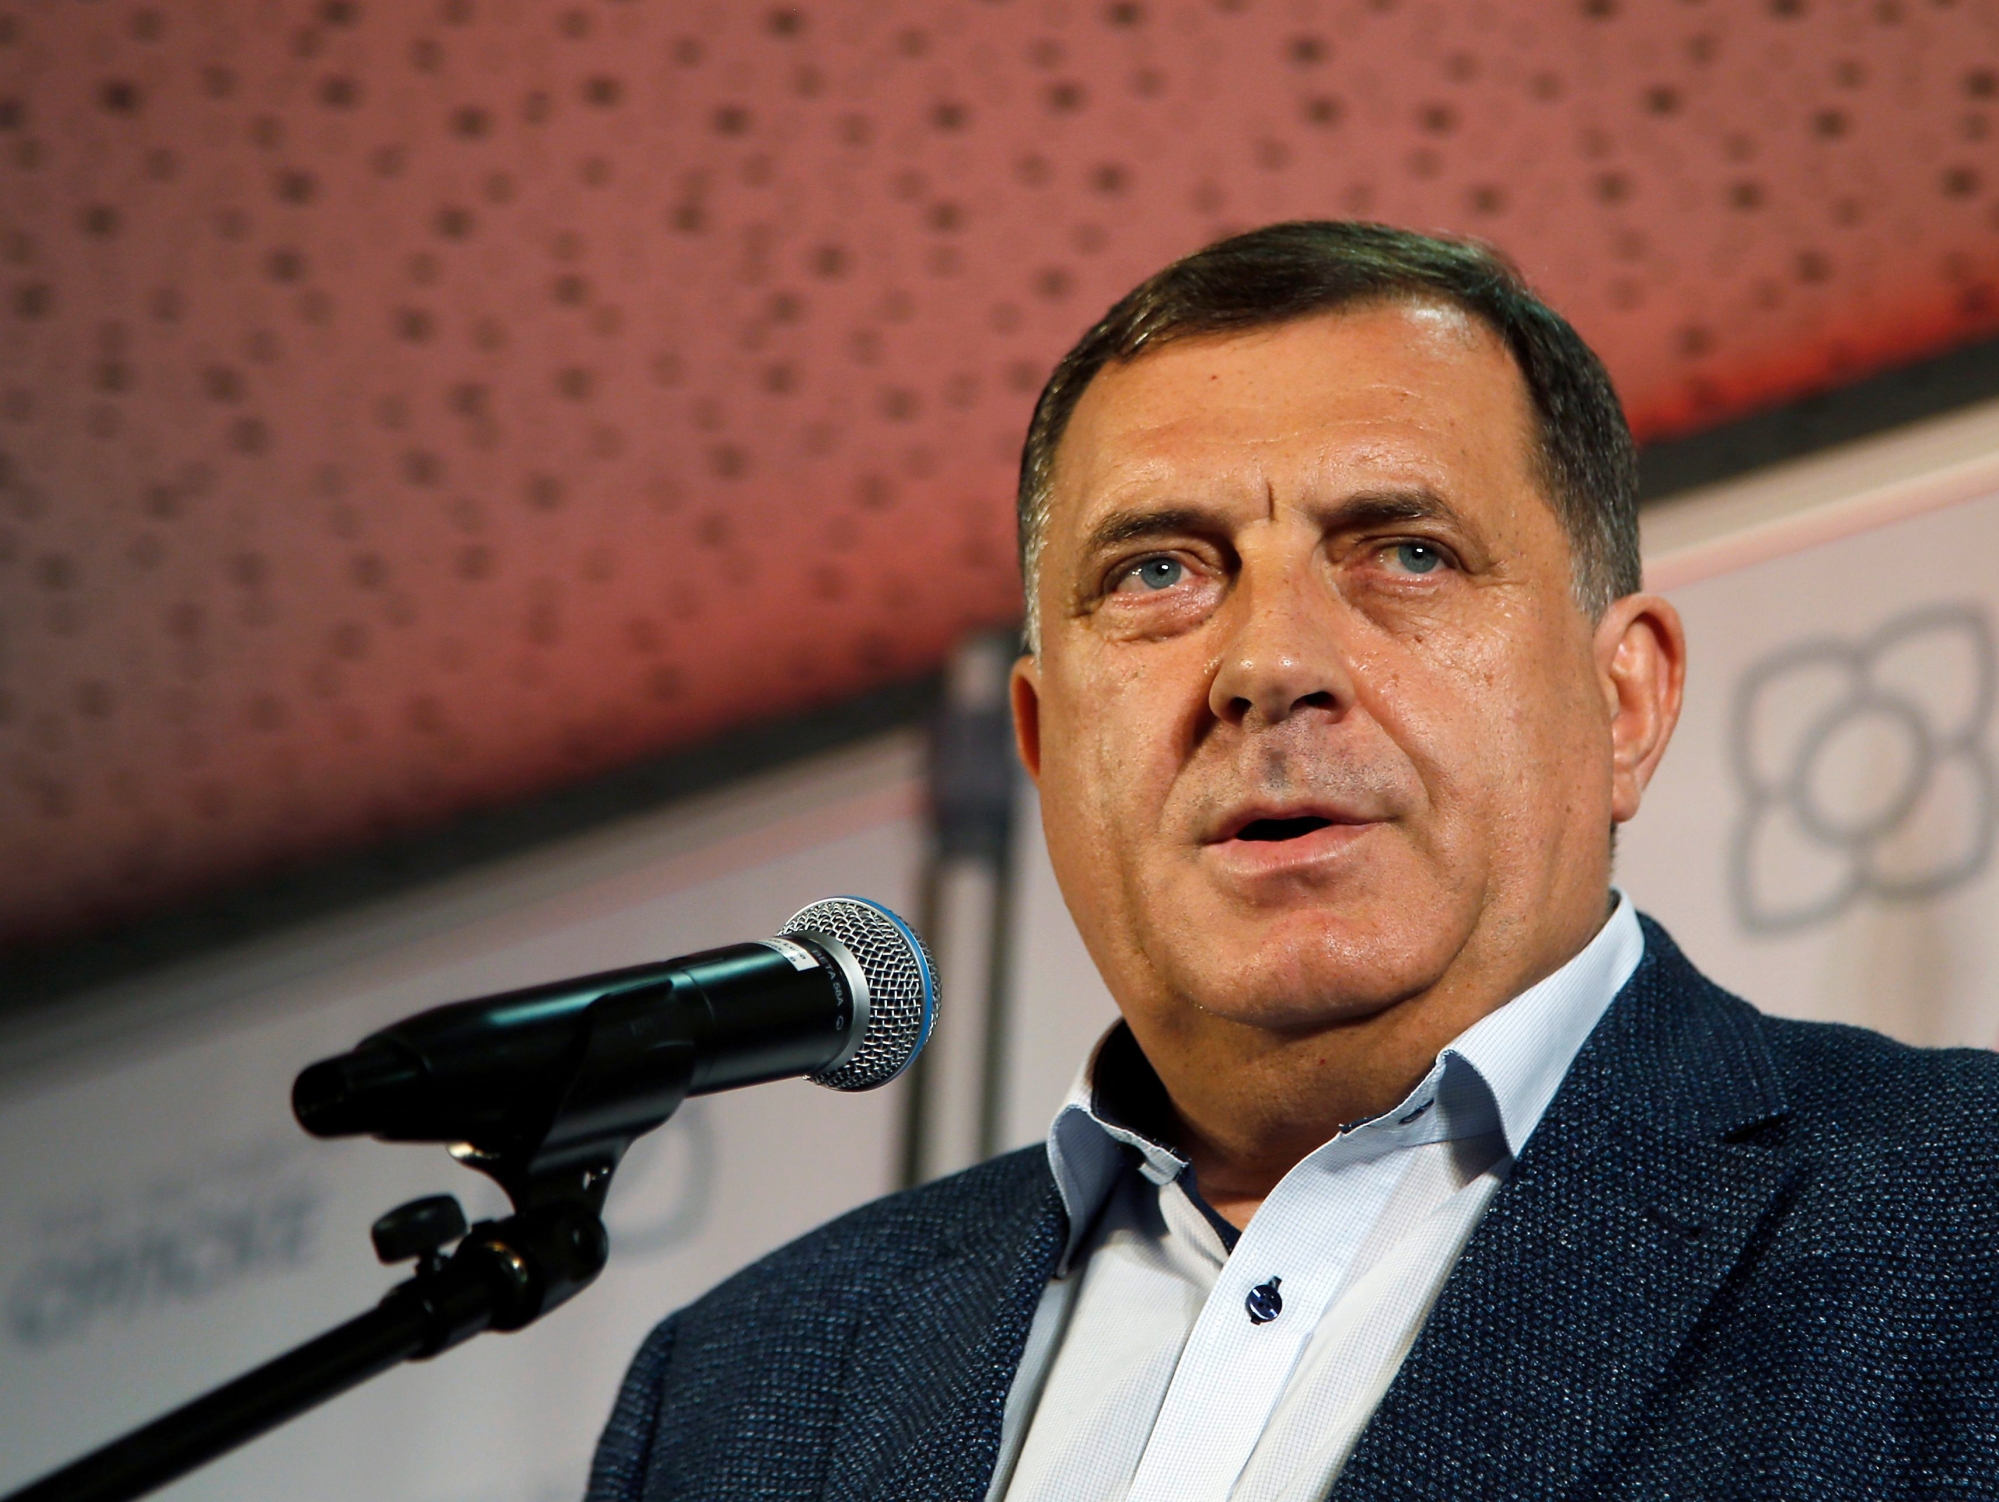 Milorad Dodik, president of the Republic of Srpska, speaks during a news conference after claiming victory in the Bosnian town of Banja Luka, 240 kilometers northwest of Sarajevo, Sunday, Oct. 7, 2018. Dodik has declared victory in the race to fill the Serb seat in Bosnia's three-member presidency. (AP Photo/Darko Vojinovic) Bosnia Election